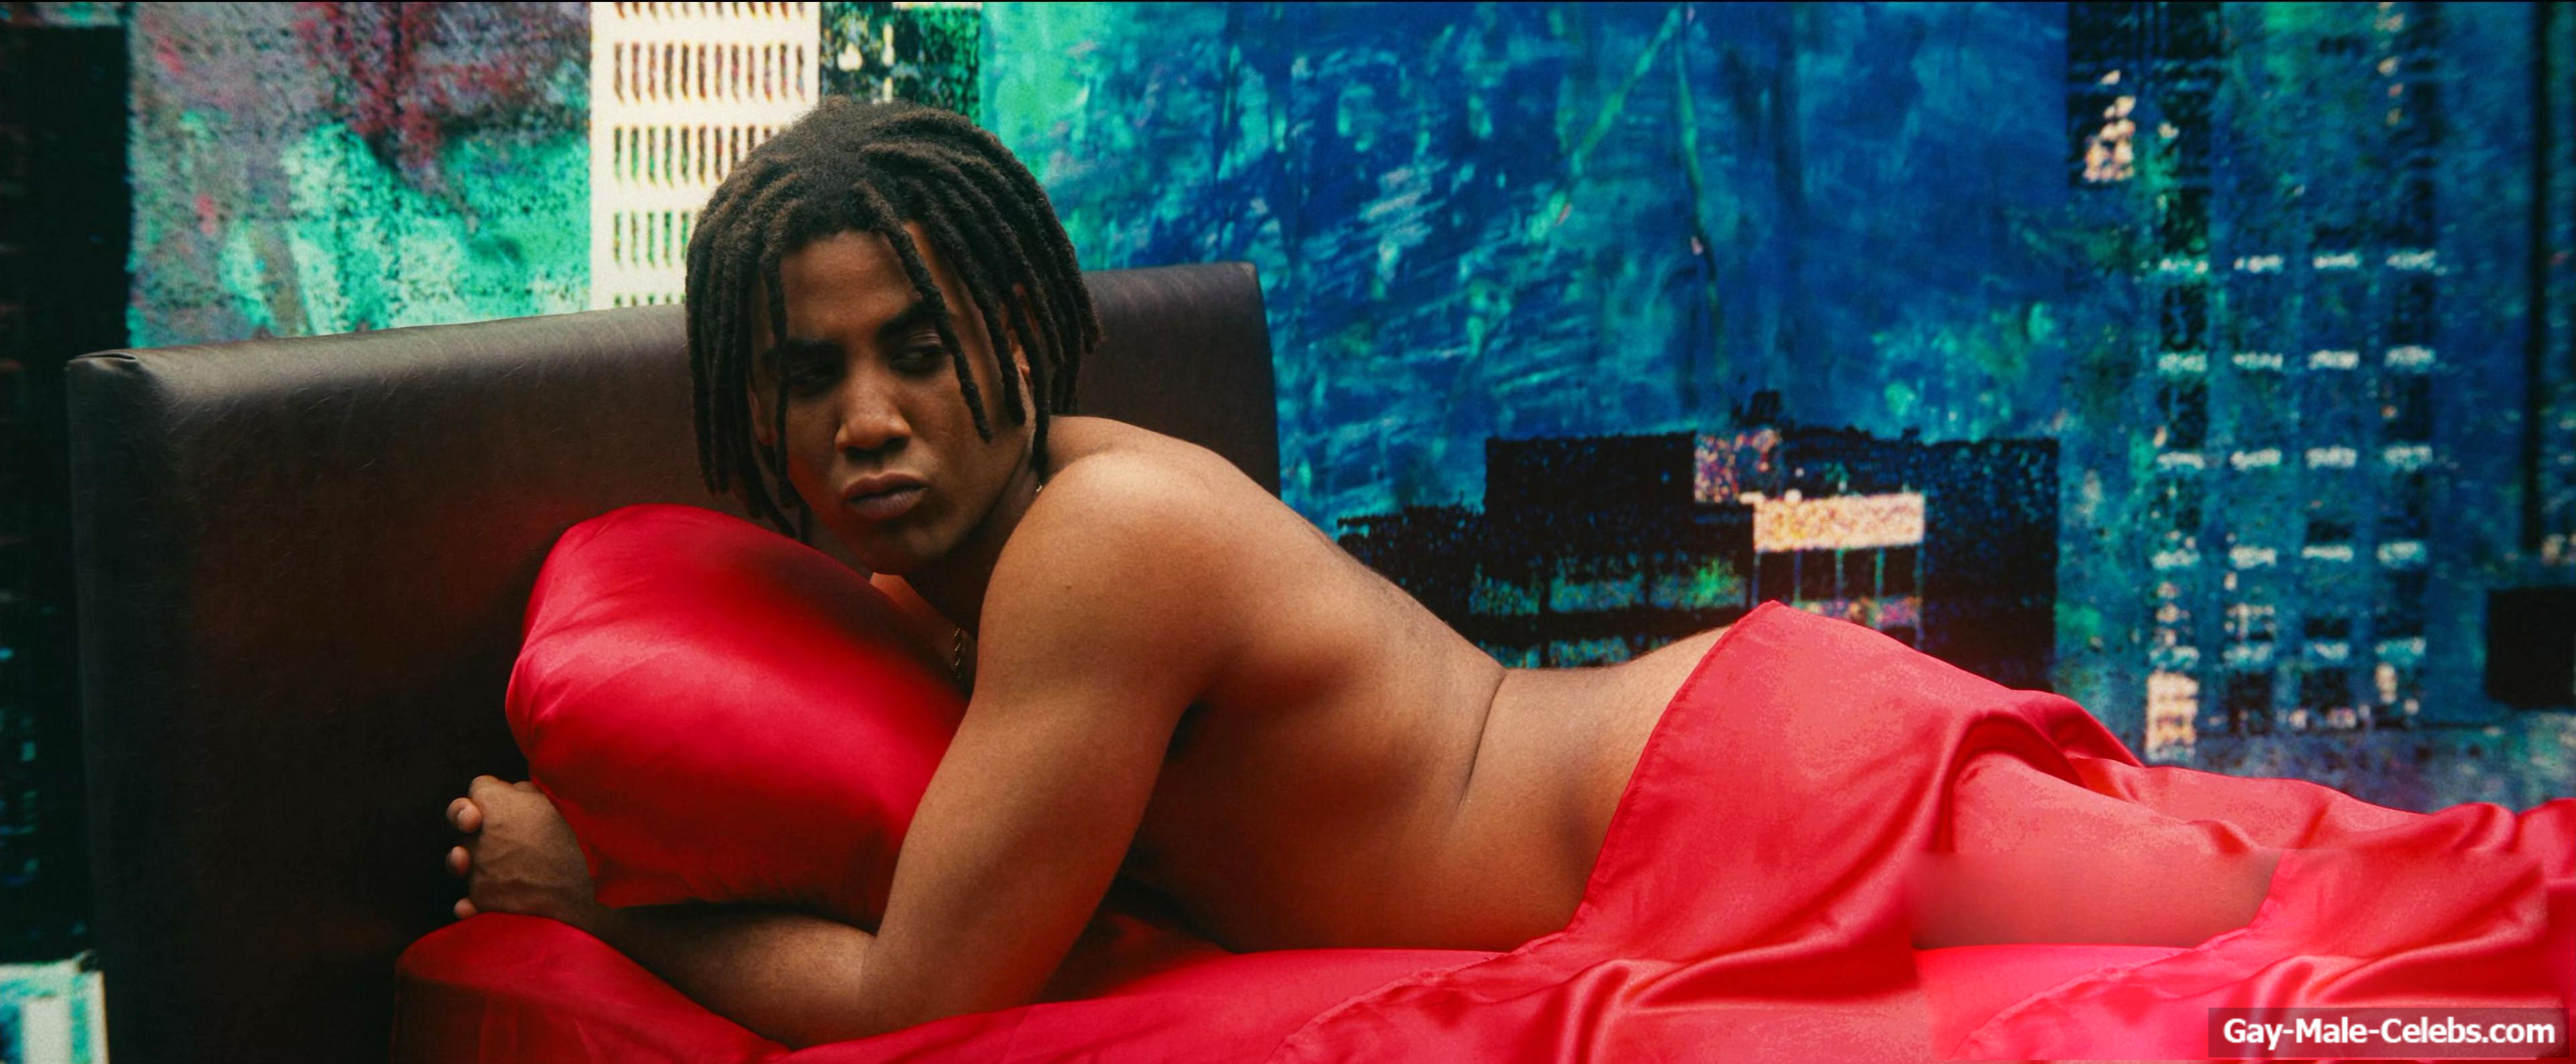 Jharrel Jerome Nude And Gay Scenes Collection